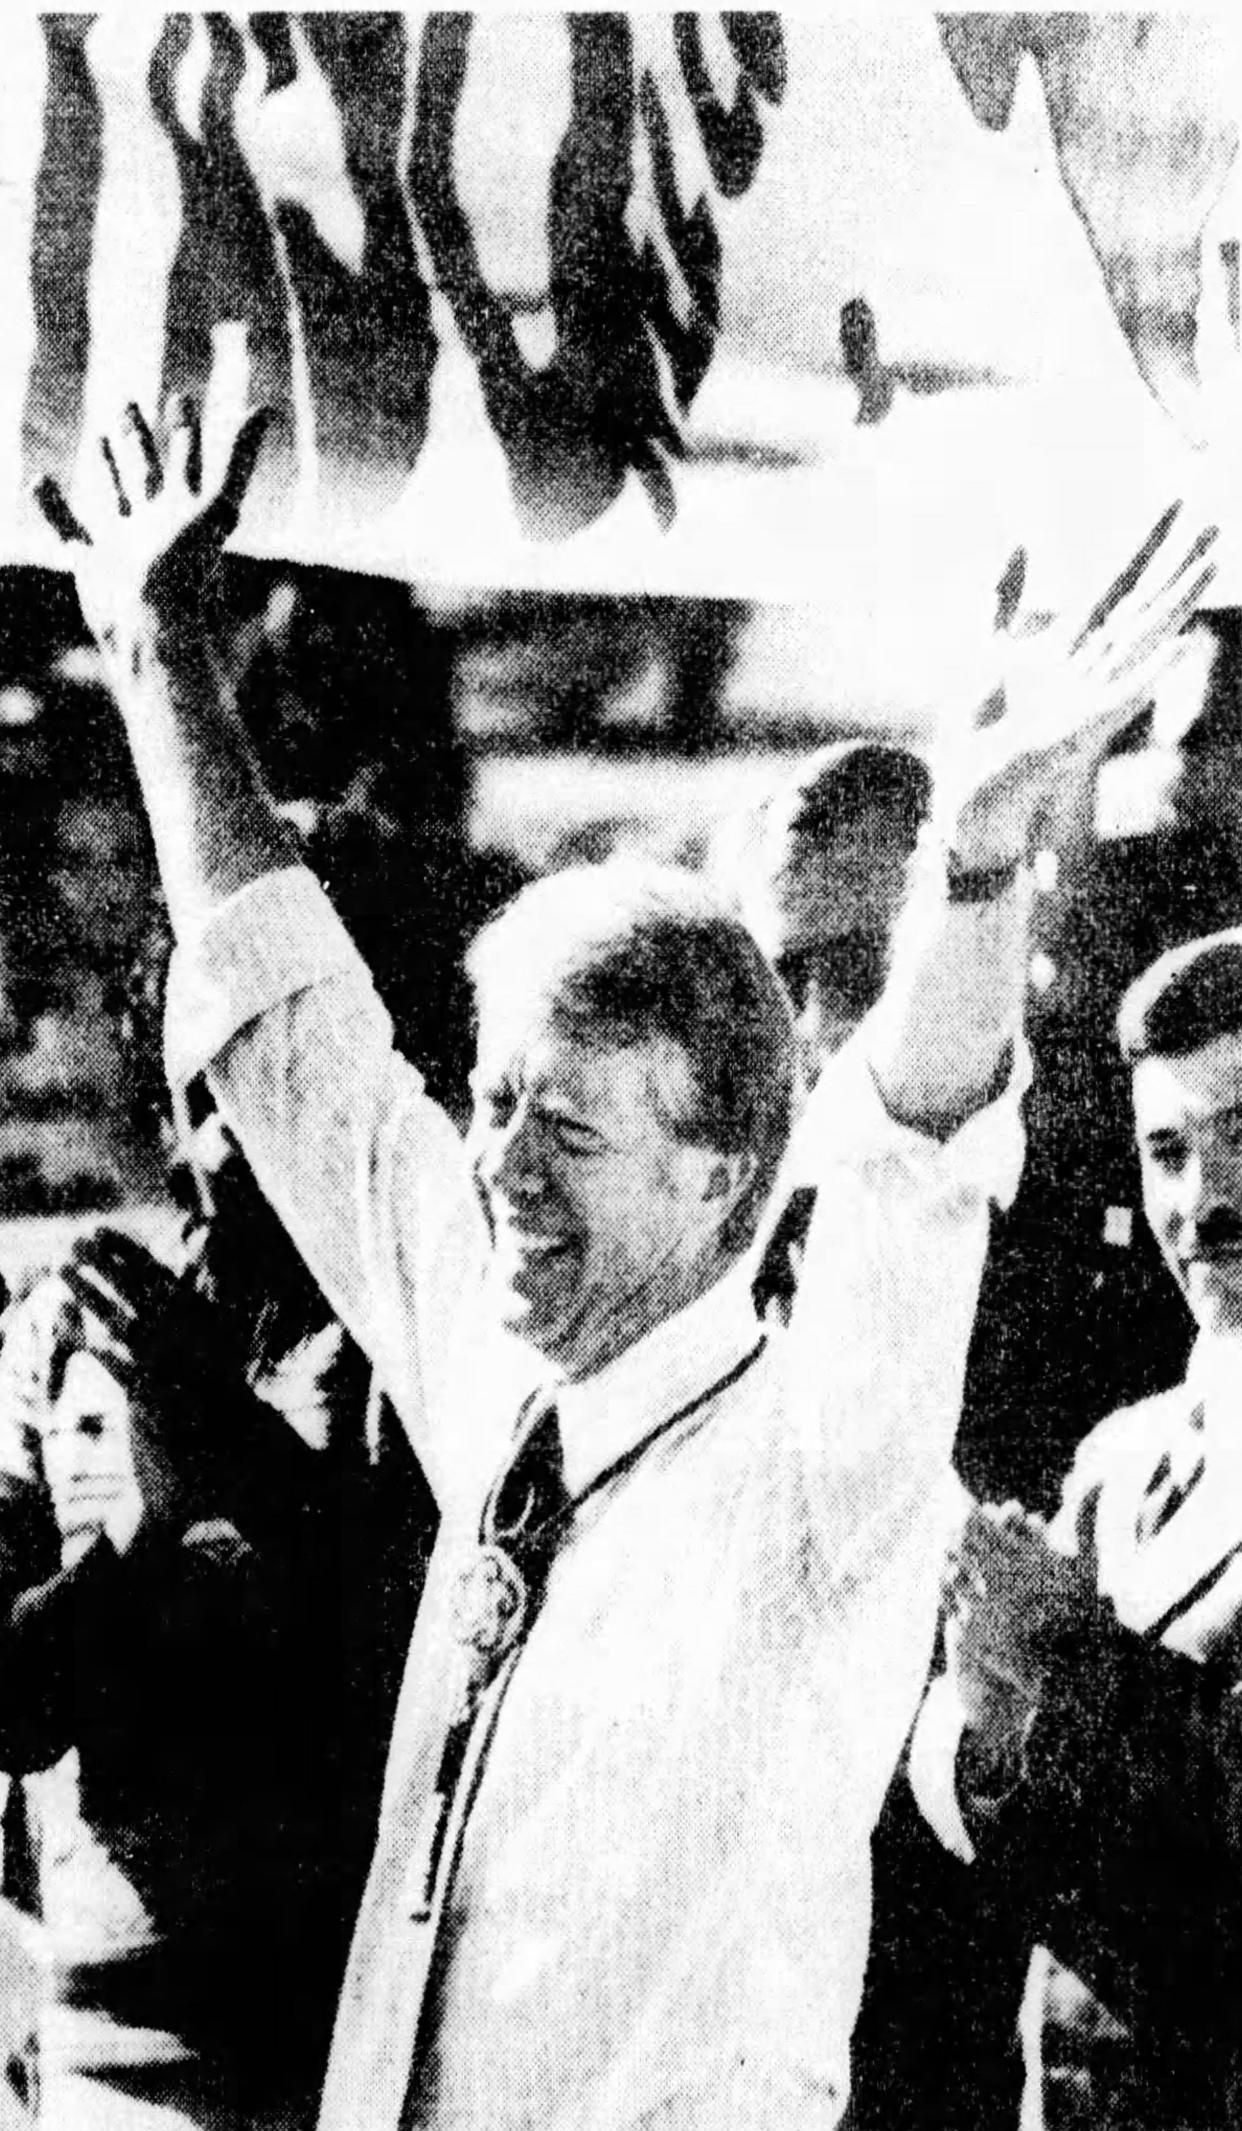 Then-Democratic presidential nominee Jimmy Carter visited El Paso on Oct. 8, 1976.